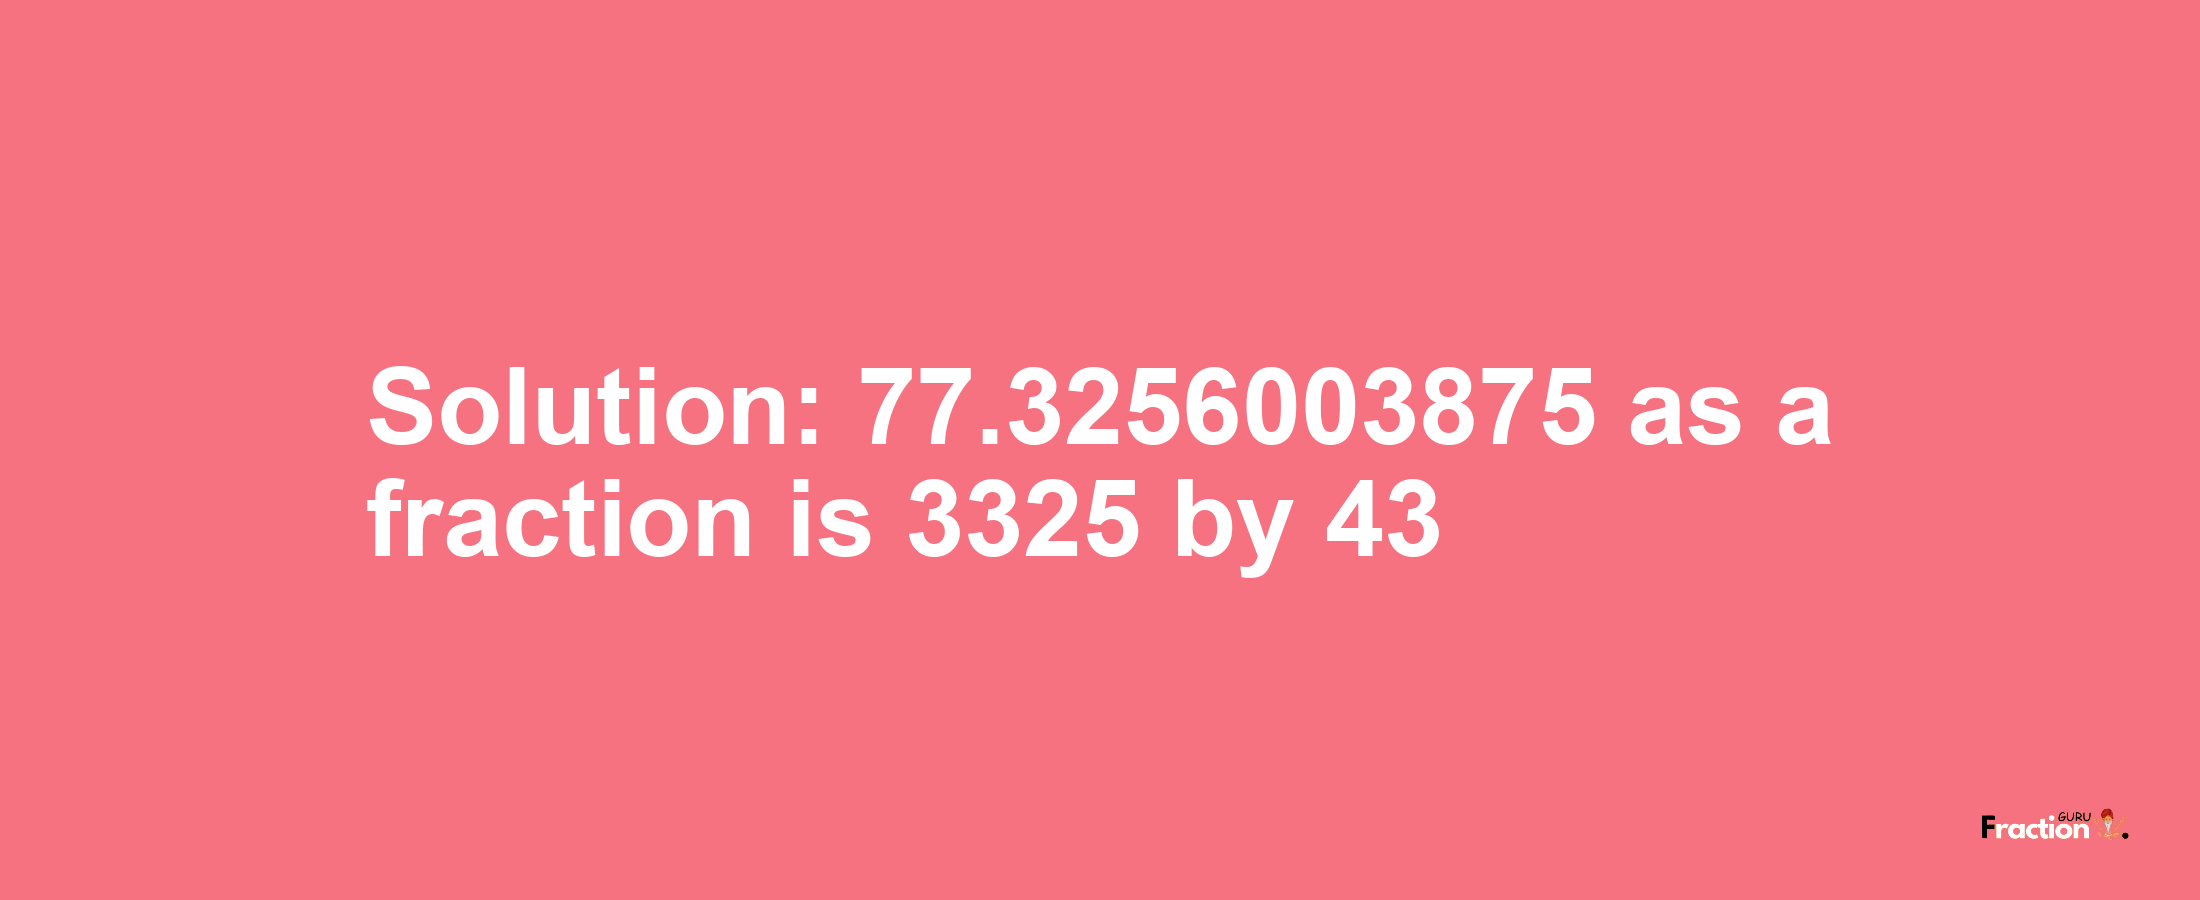 Solution:77.3256003875 as a fraction is 3325/43